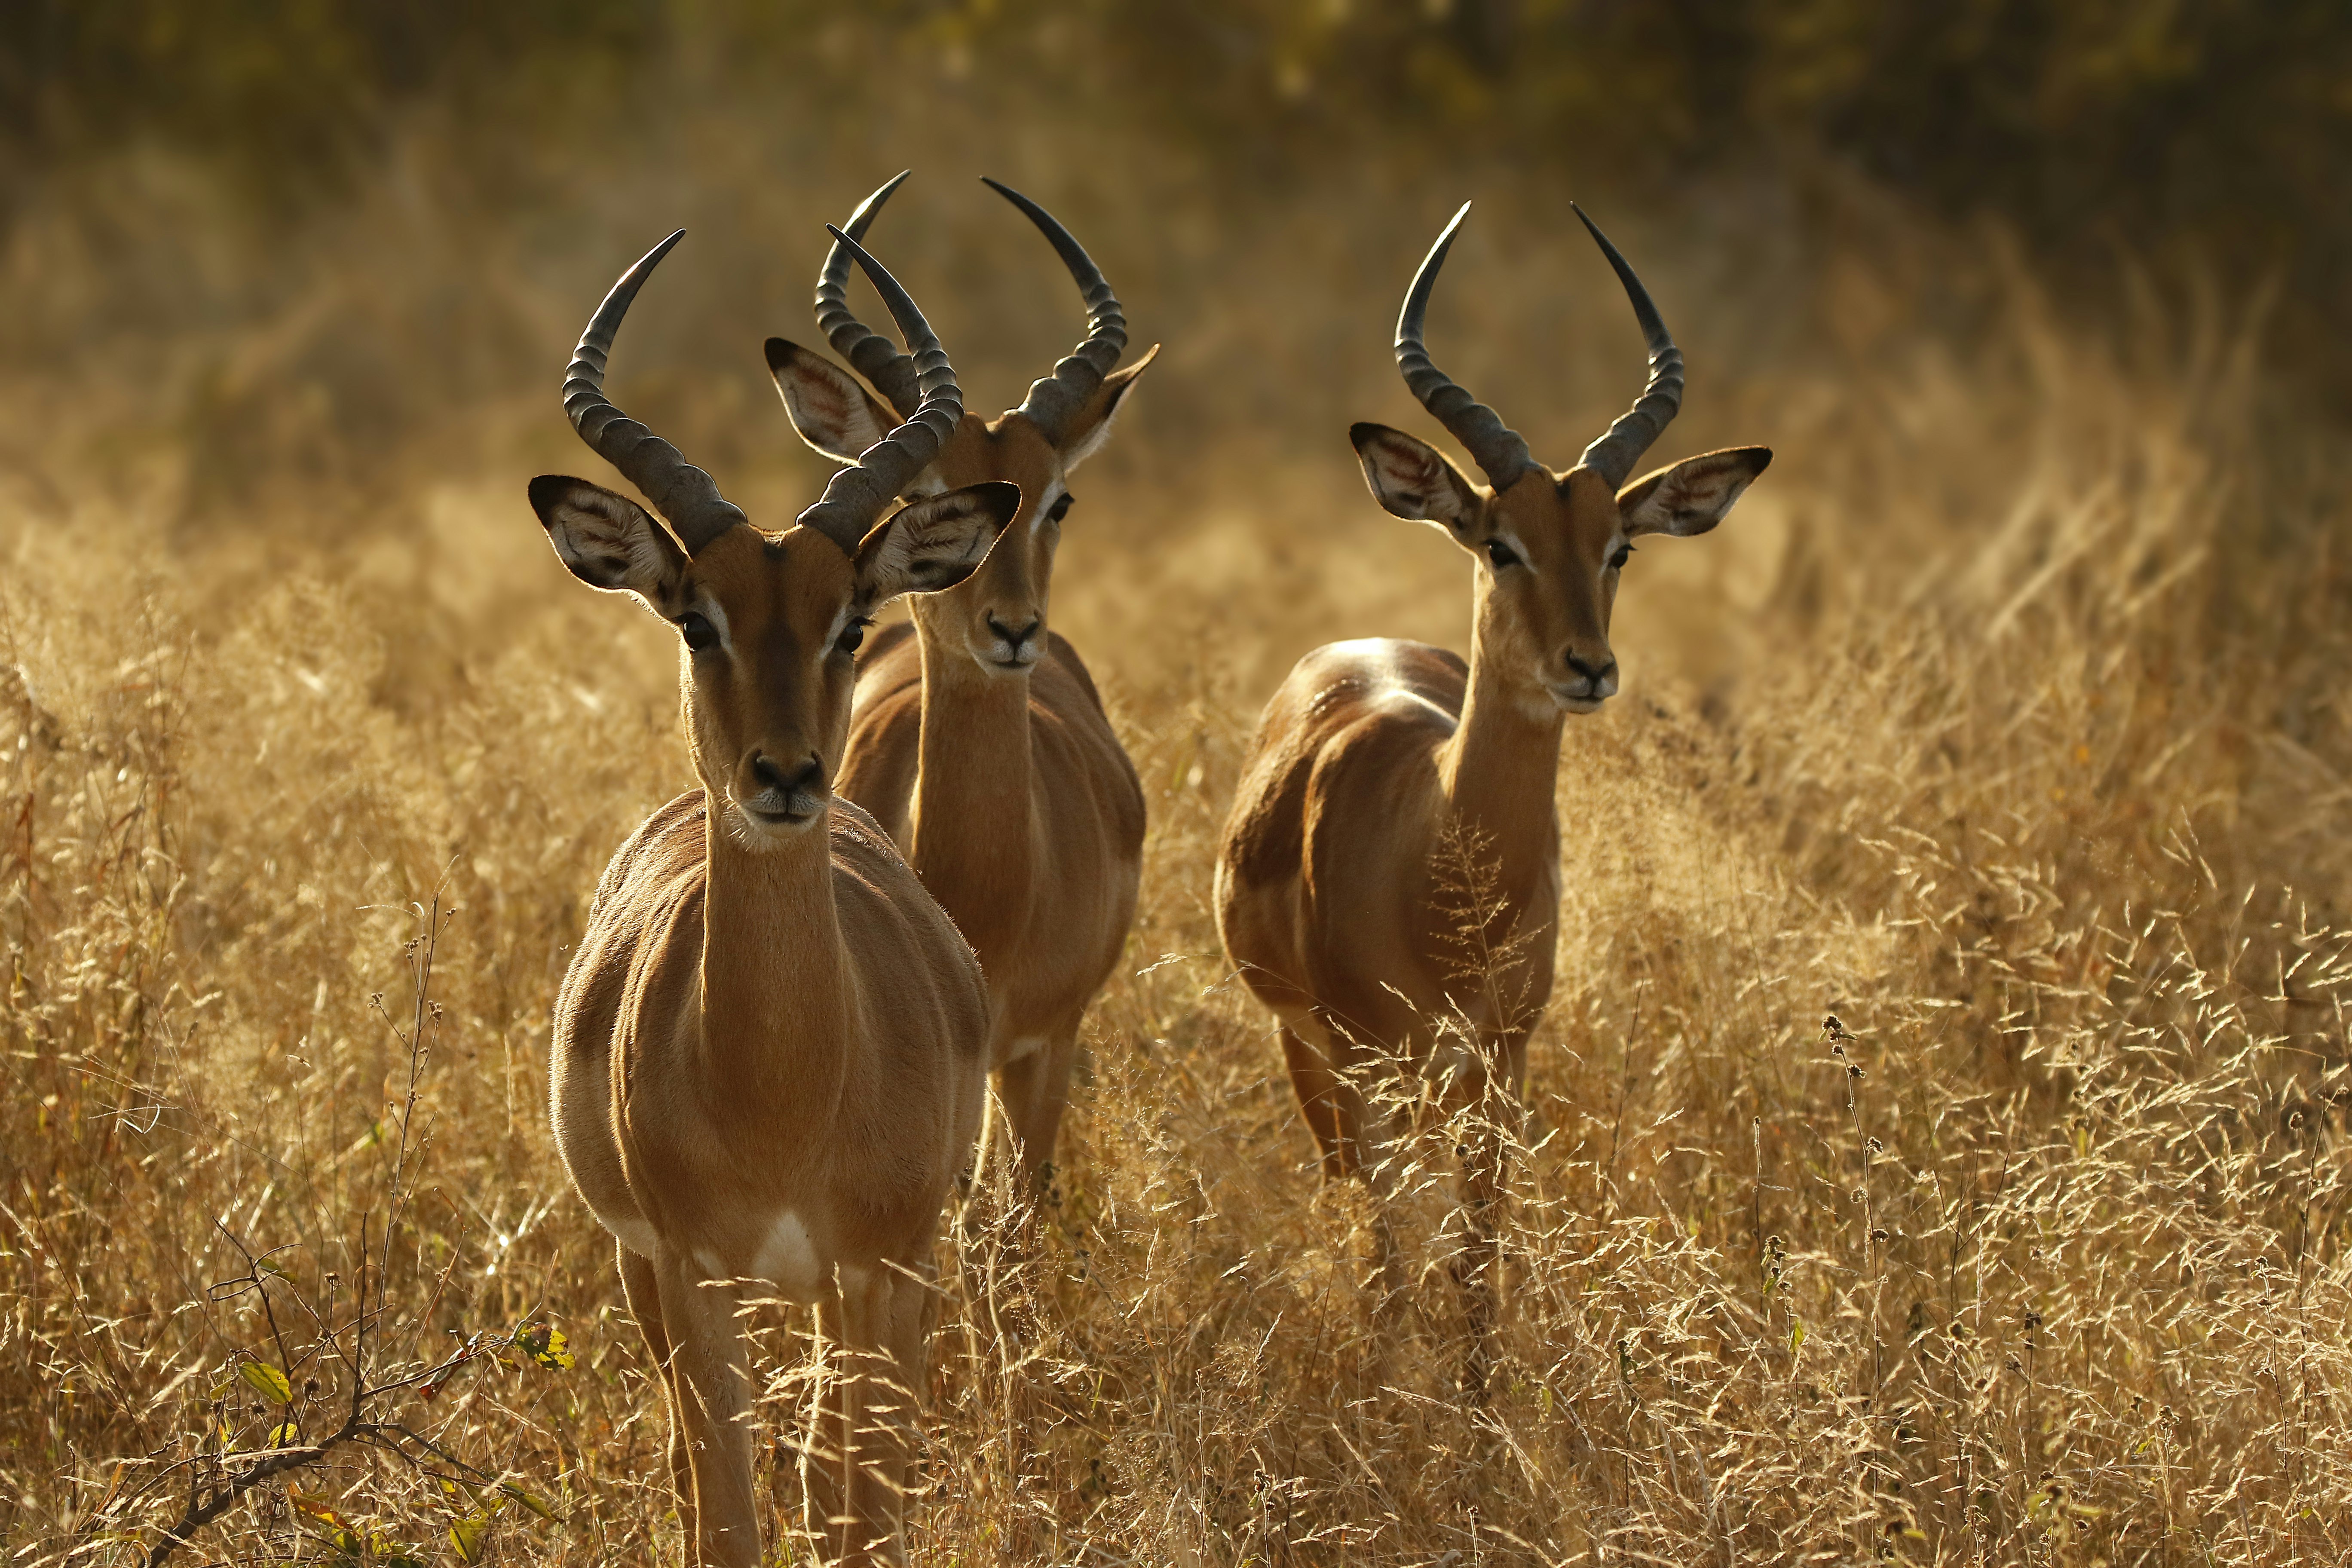 Impalas in Africa are antelope and are totally different from Wyoming's pronghorn.